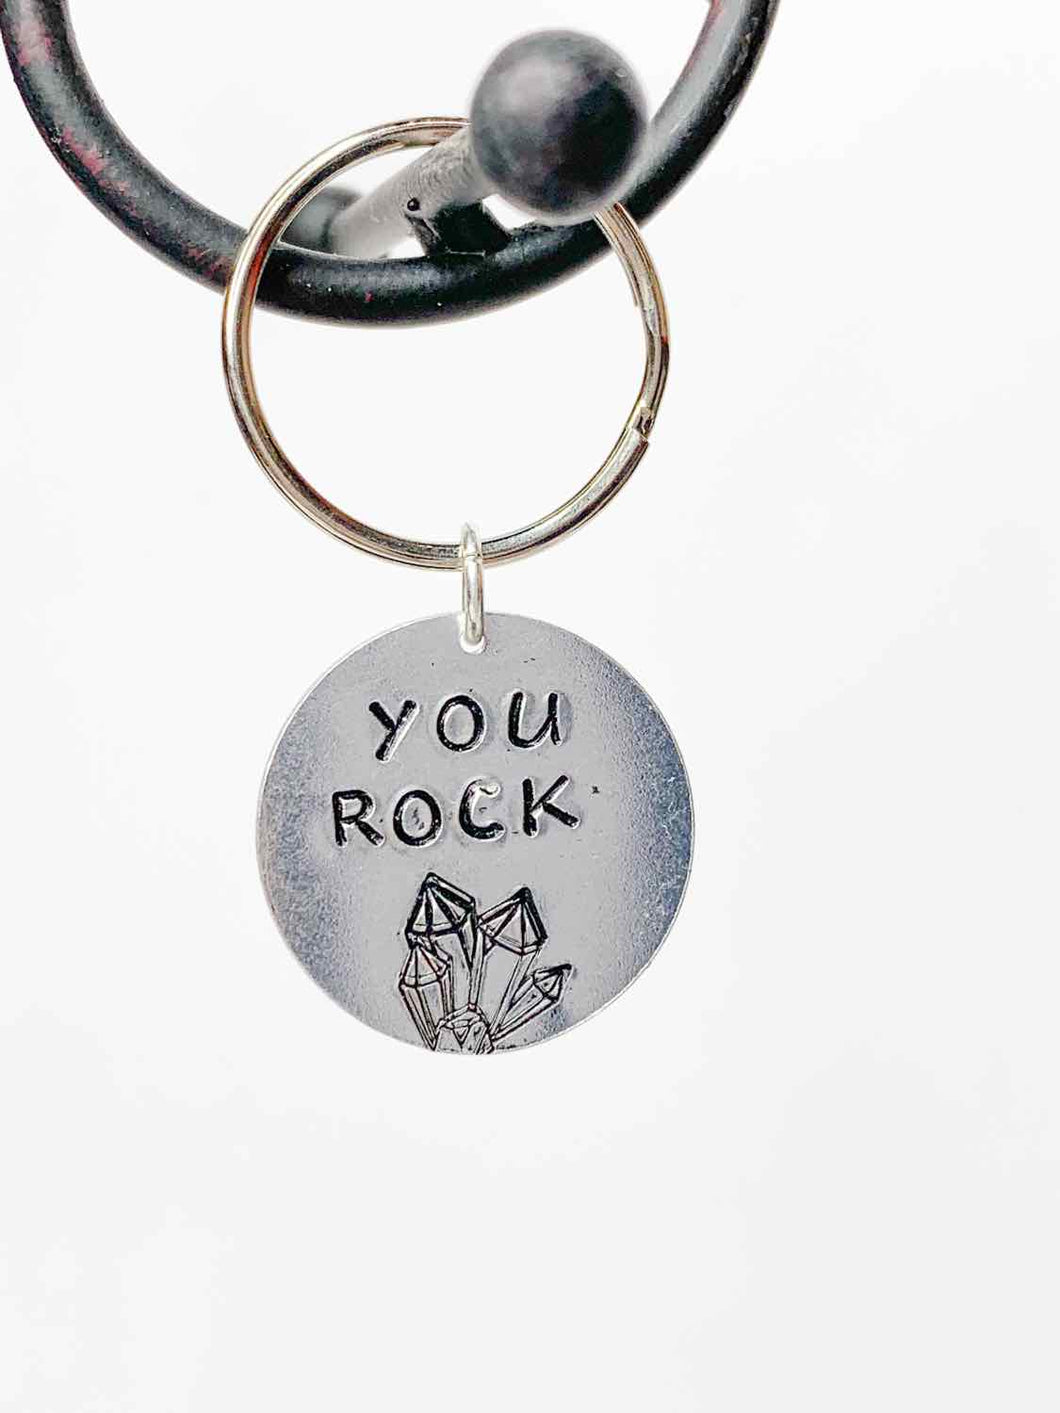 You Rock - Small Key Chain